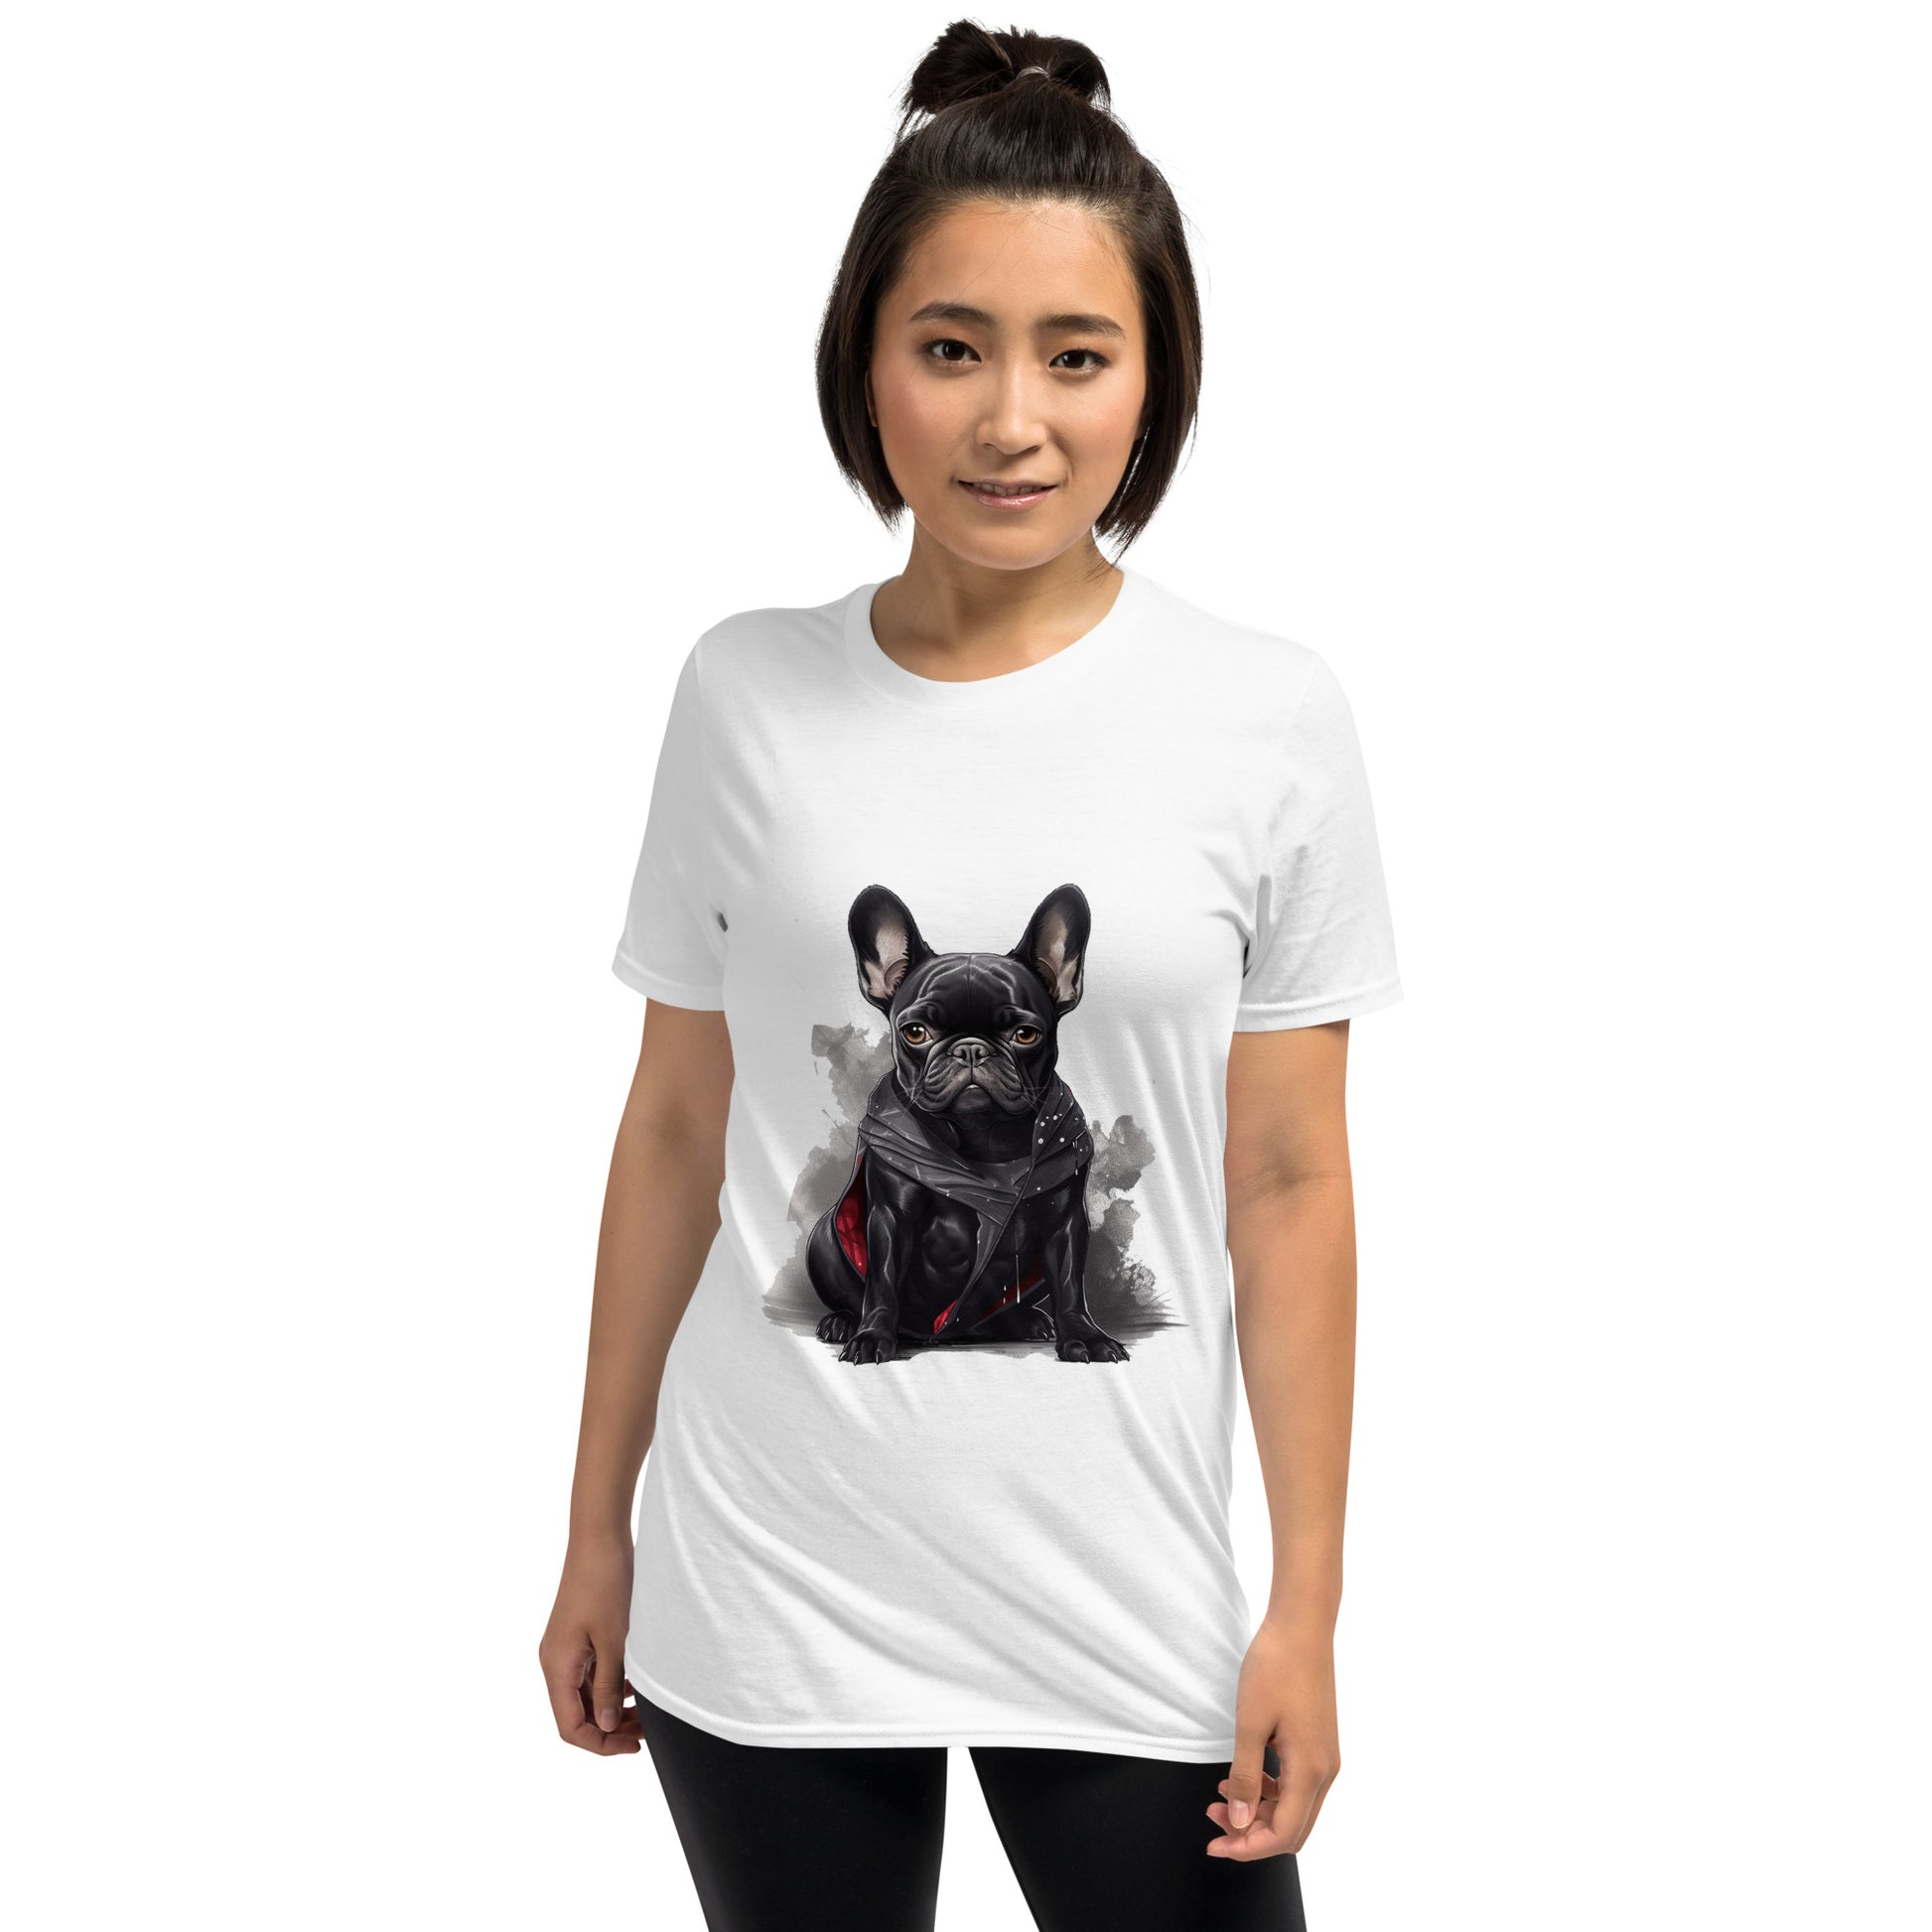 Frenchie Love Unisex T-Shirt - The Ultimate Fashion Statement for Dog Enthusiasts